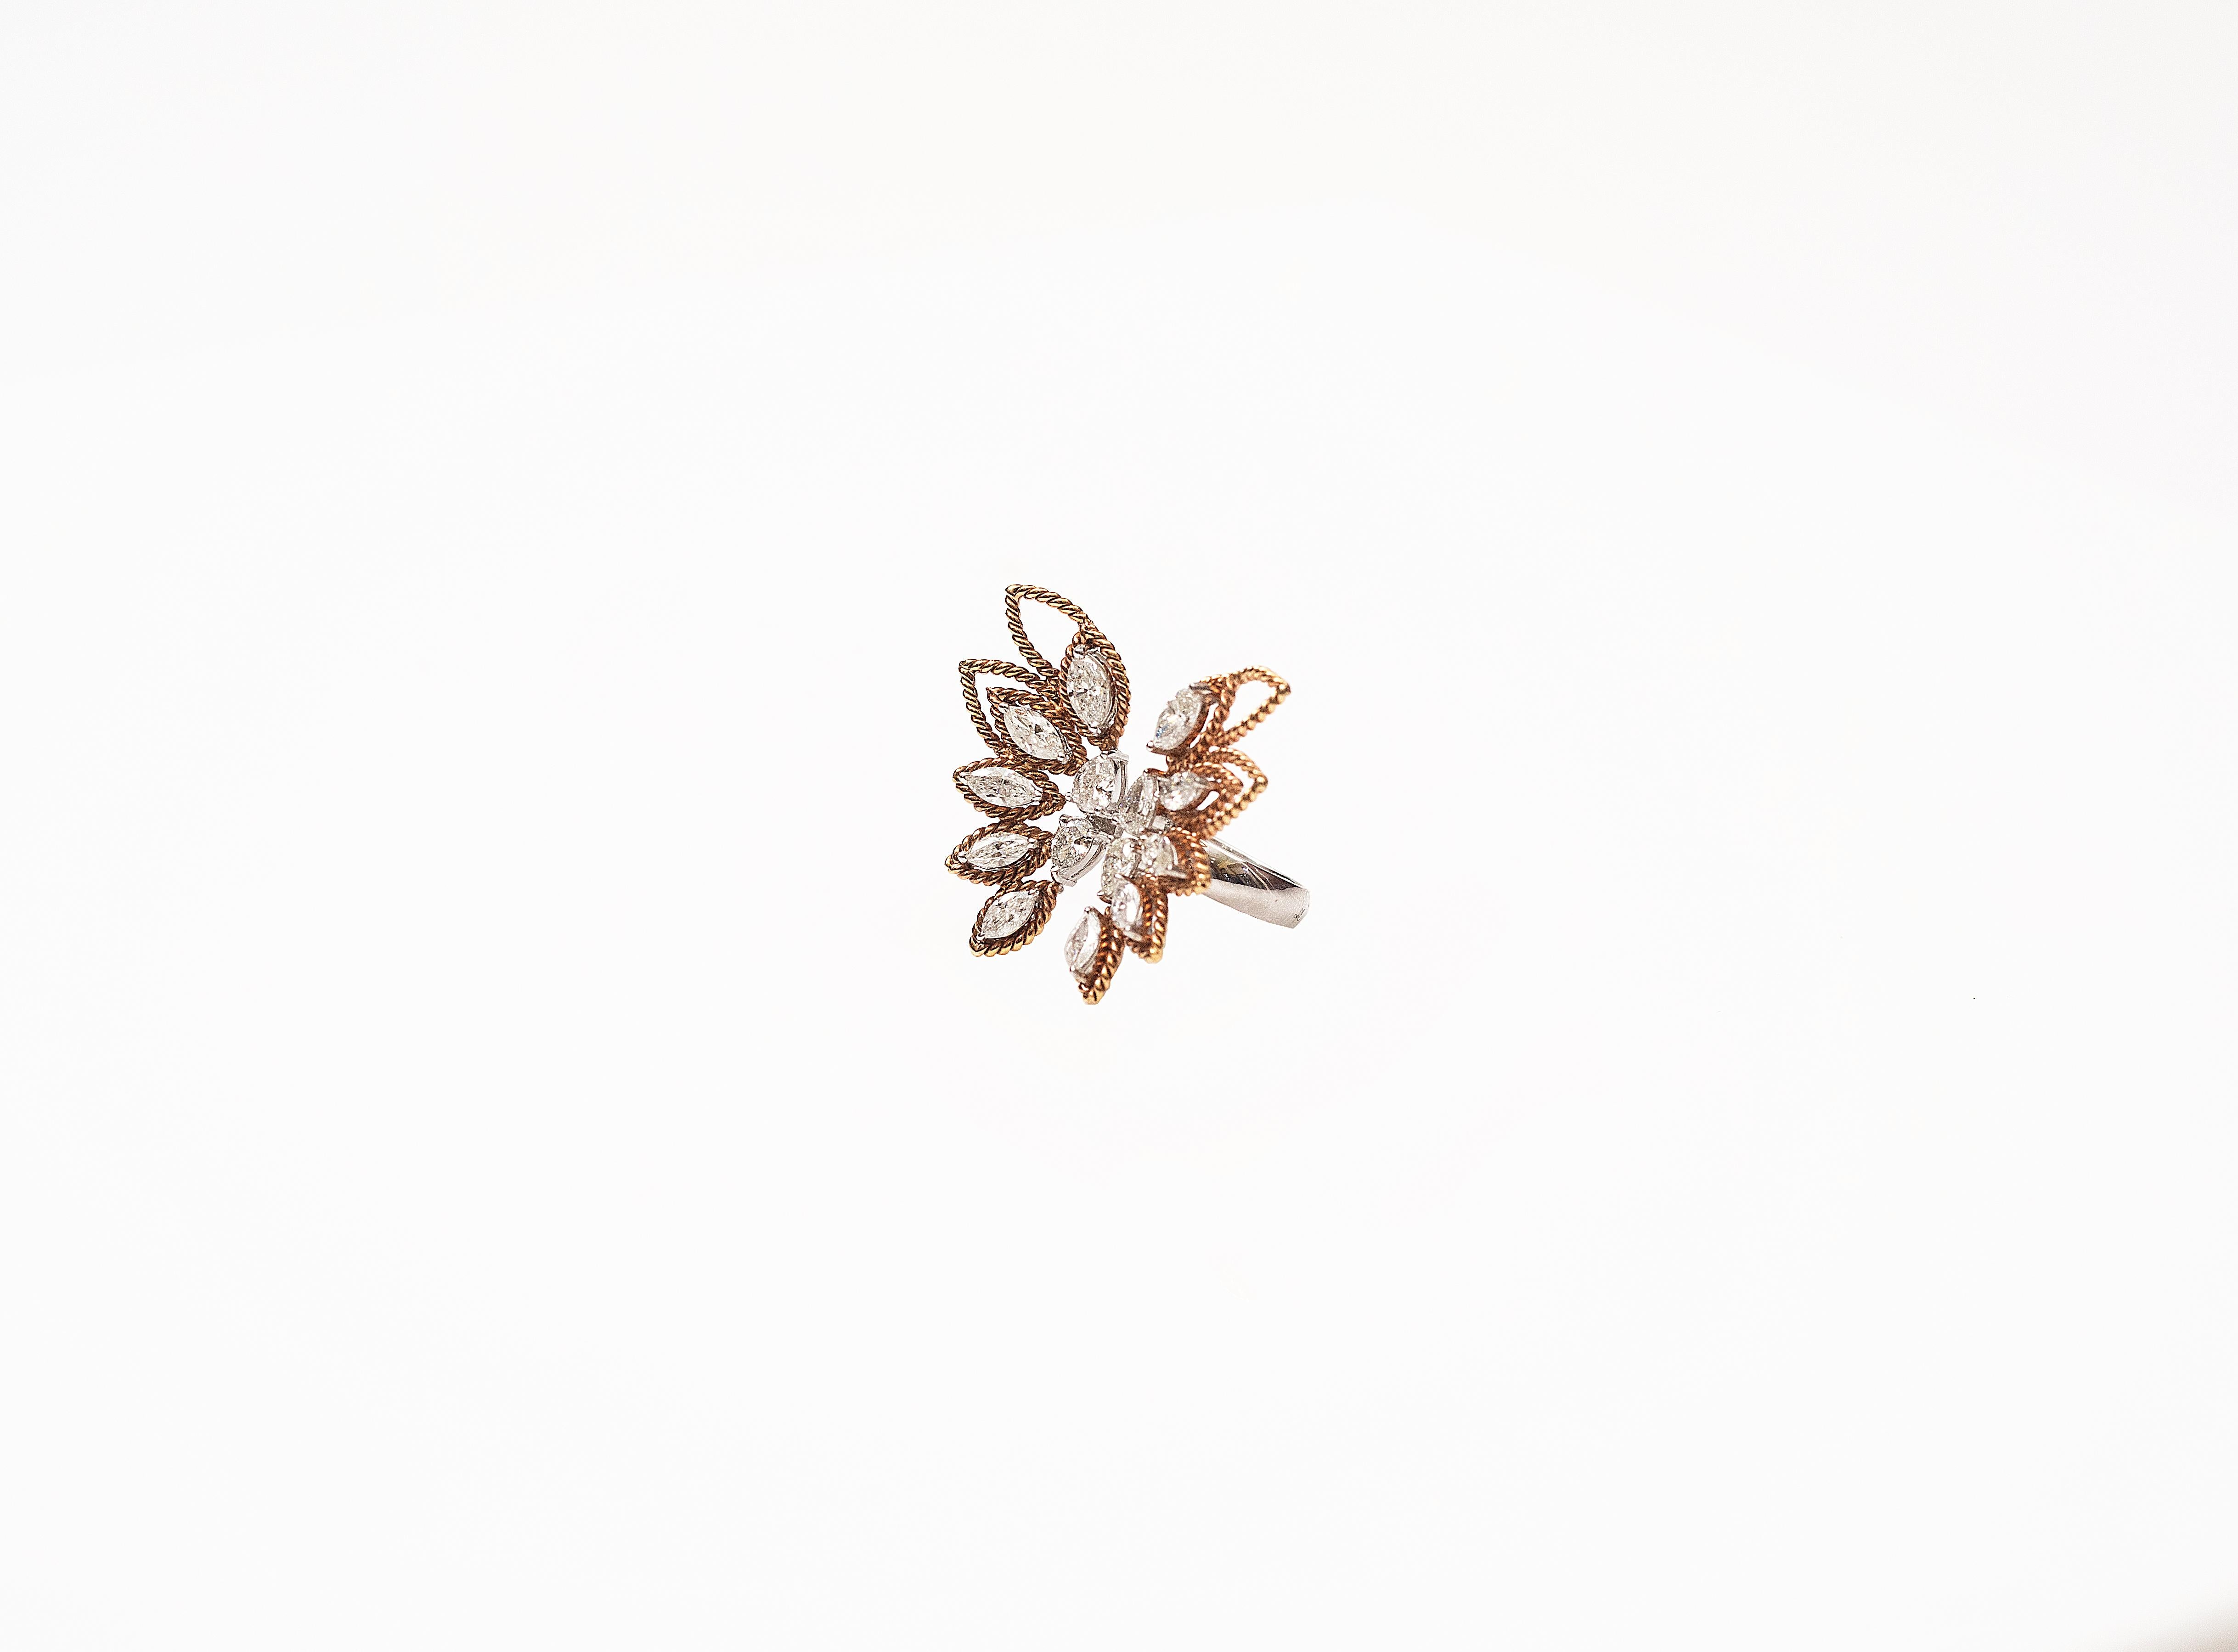 Handcrafted Butterfly Cocktail Ring in 18K Gold studded with Marquise shape Diamonds.
This ring consists of Twisted Gold Wire beautifully handmade in butterfly design. This ring is a statement making piece.
Gold weight - 12.052 gms
Diamond Clarity -